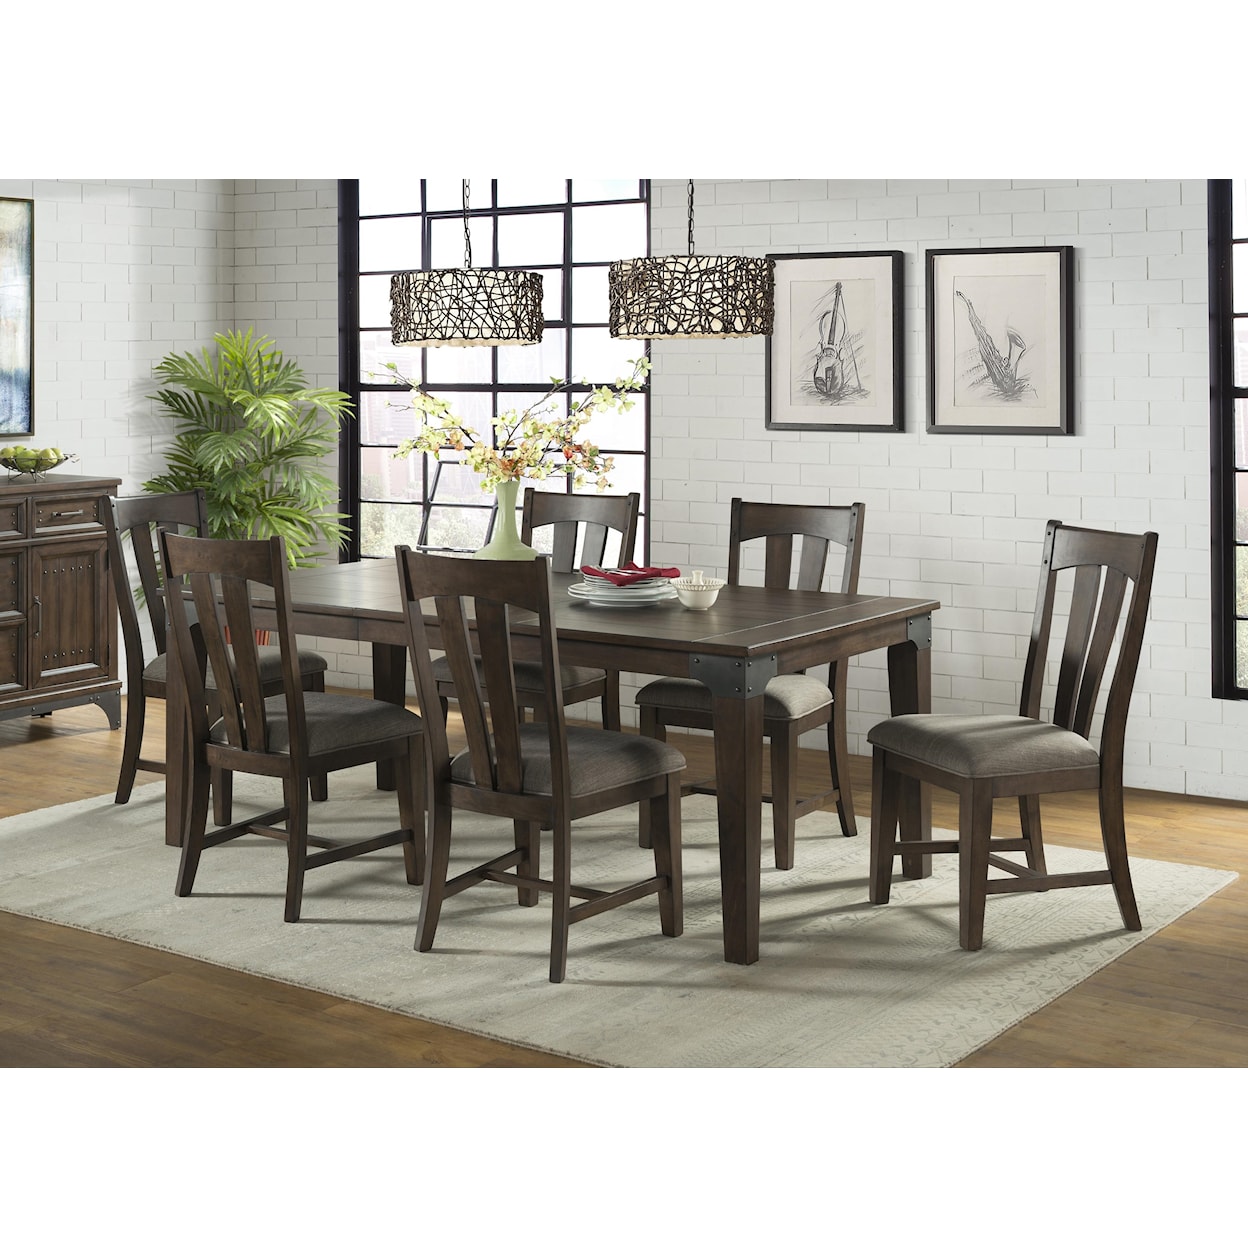 Intercon Whiskey River  5 Piece Table and Chair Set